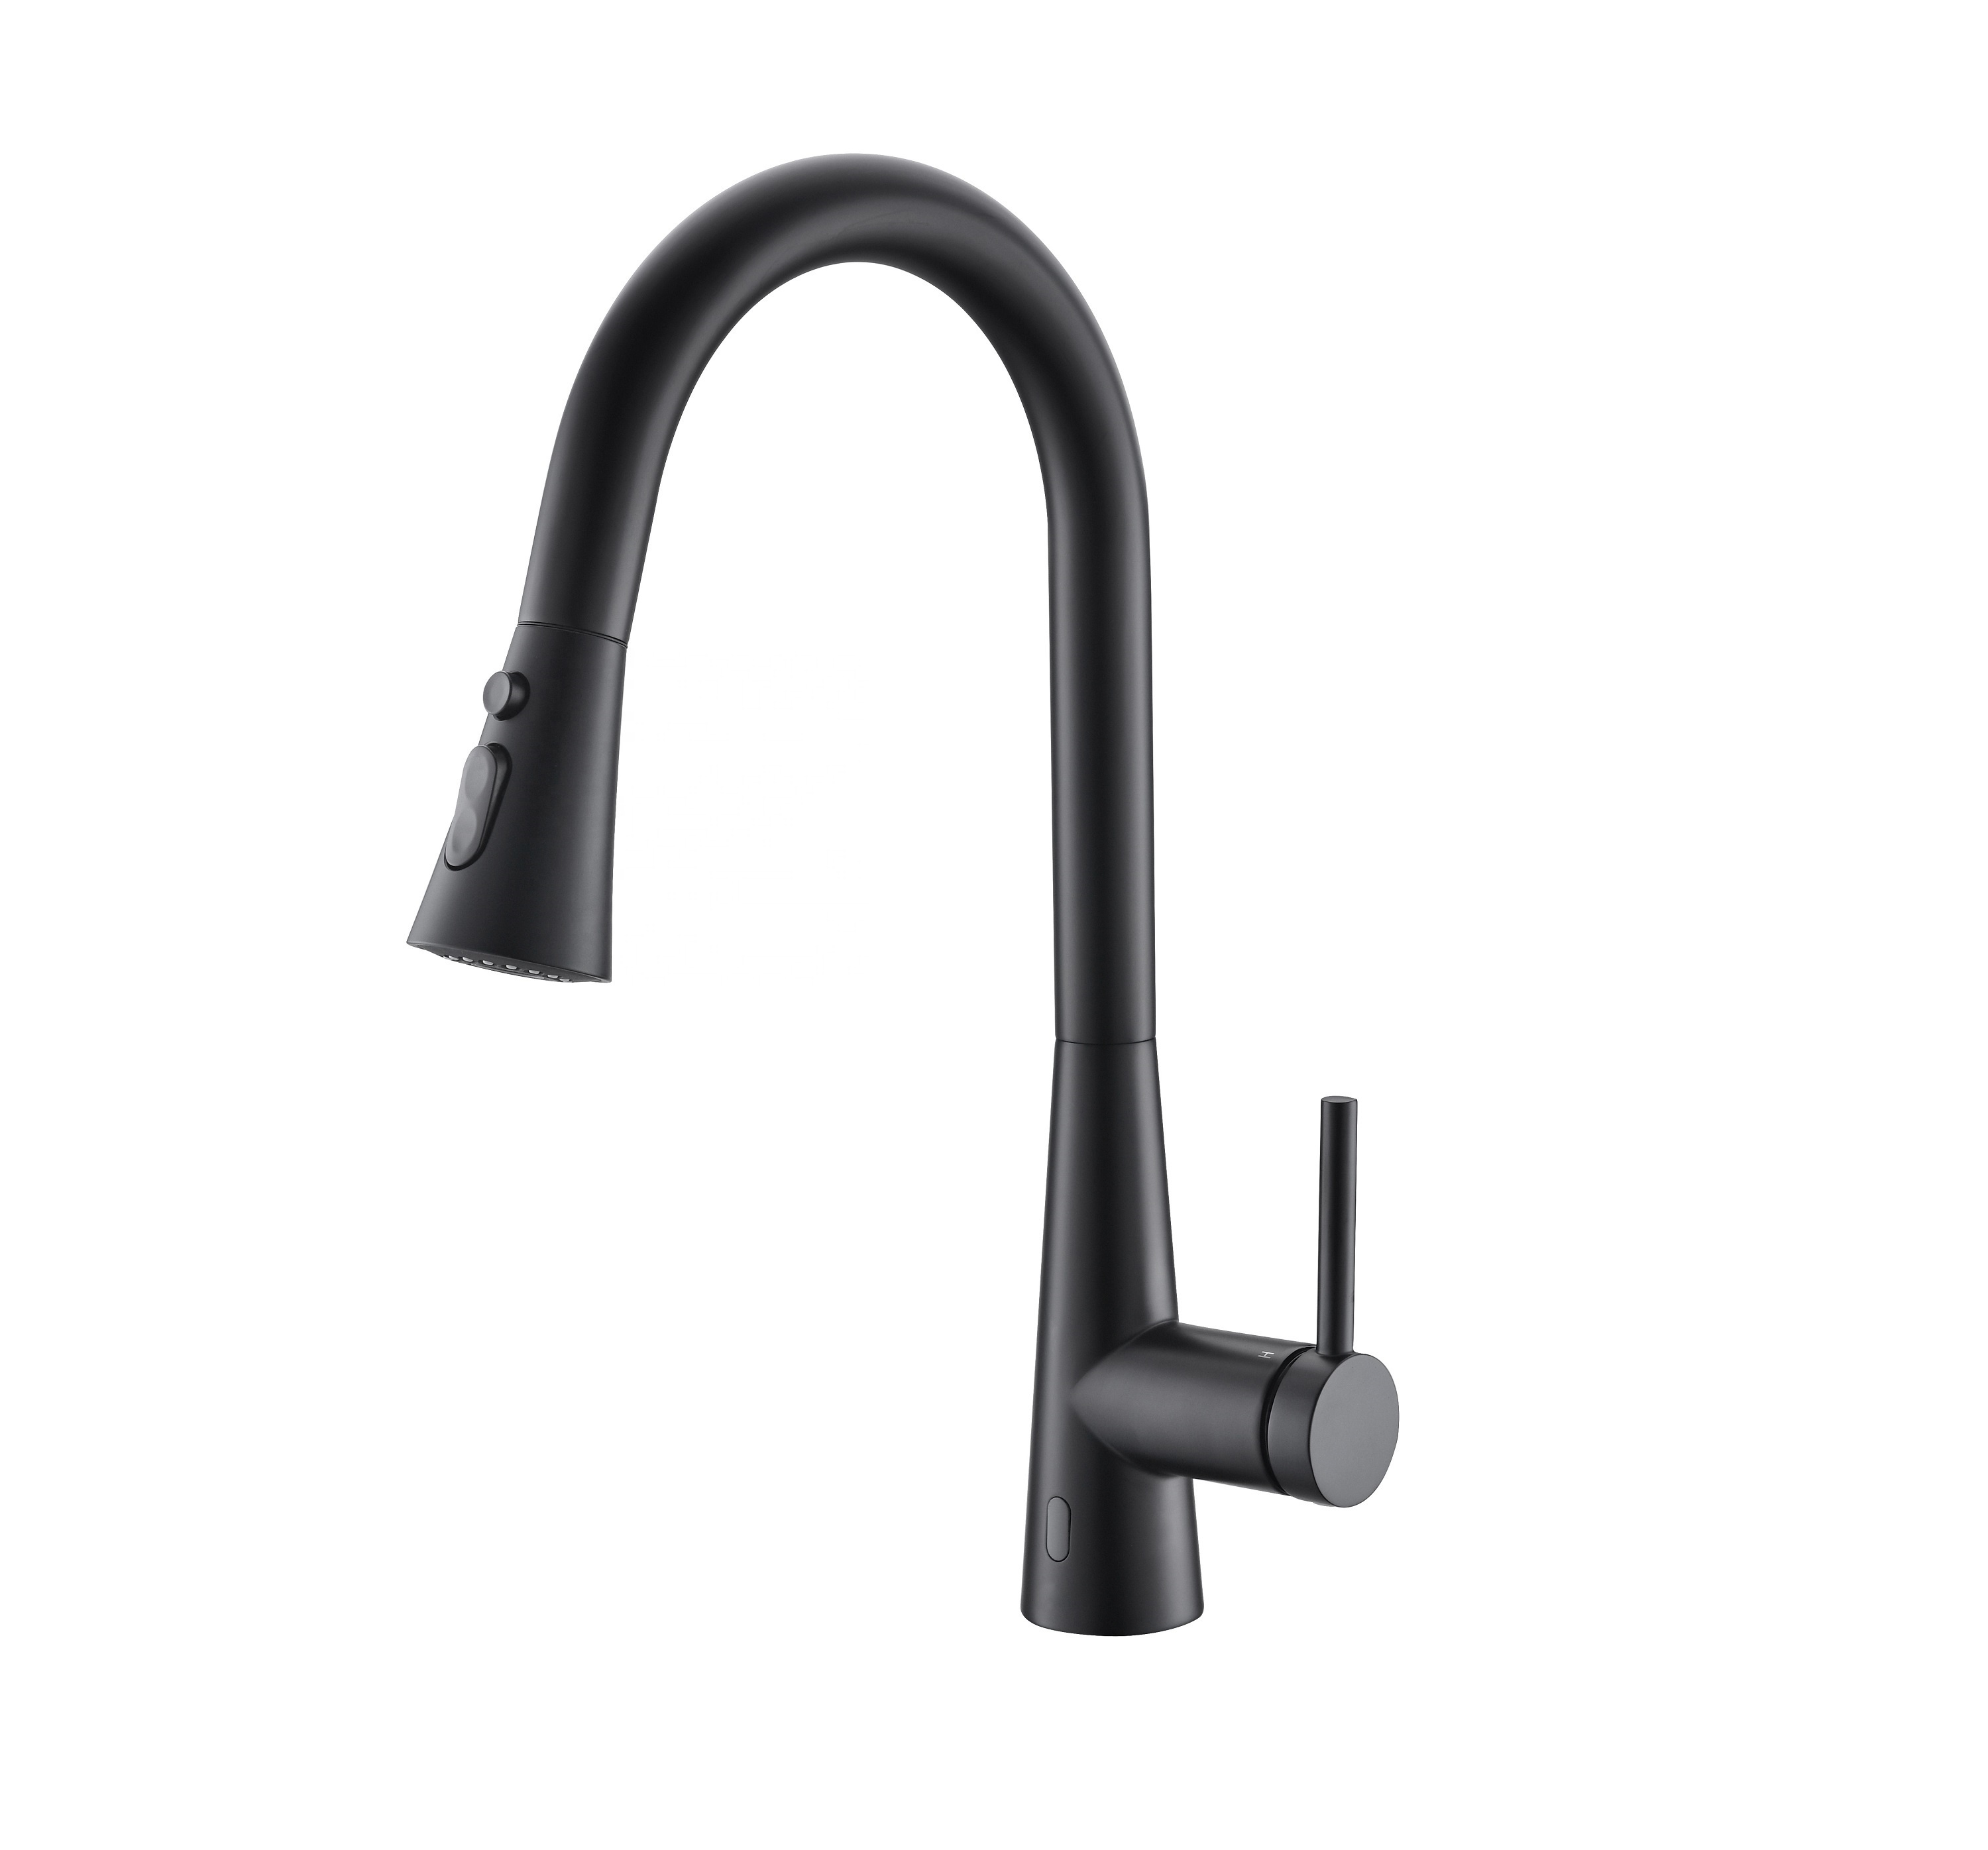 Automatic Sanitary Ware Faucet Infrared Sensor Kitchen Faucet Pull Down Kitchen Sink Faucet